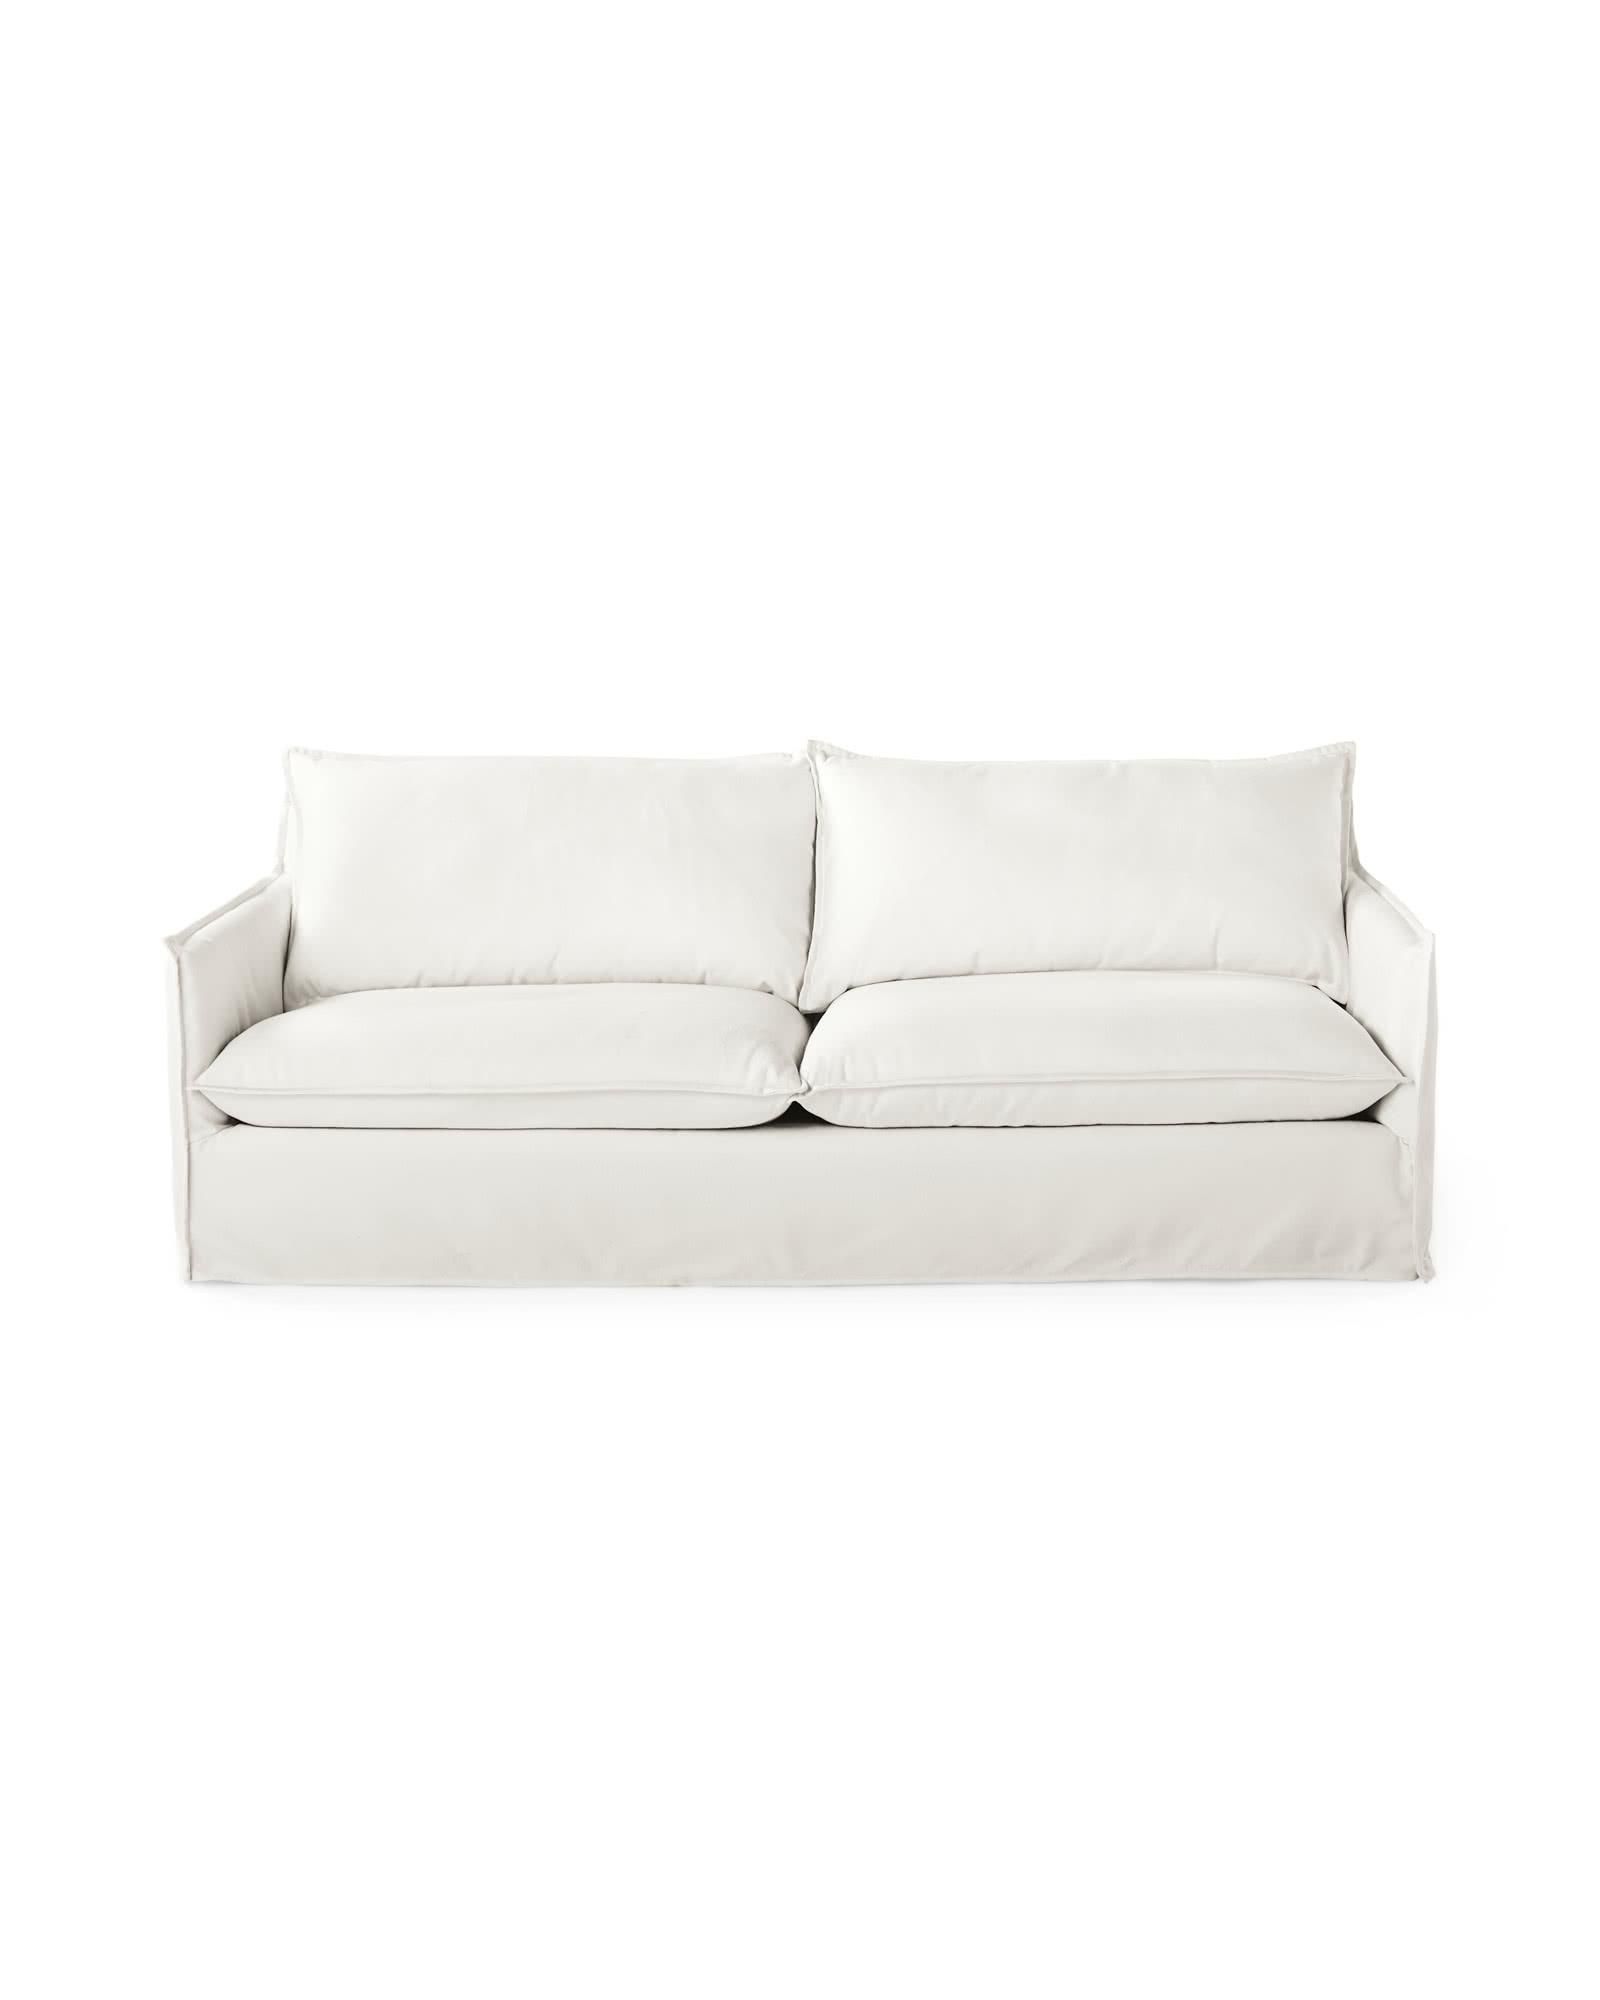 Sundial Outdoor Sofa - Slipcovered | Serena and Lily